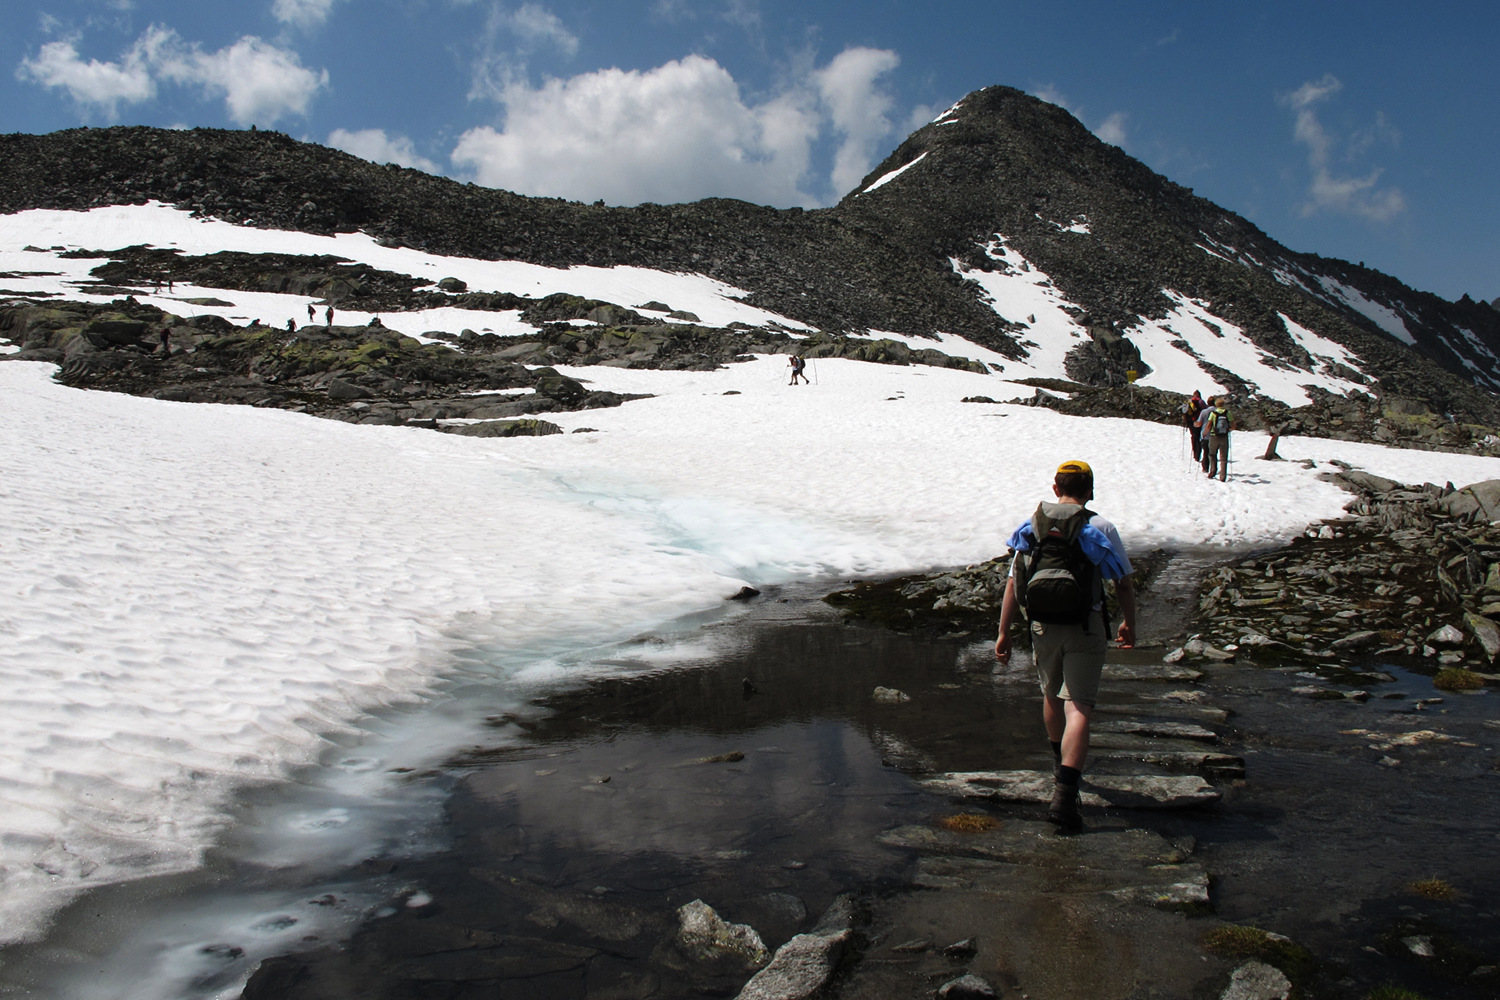 Hiking over snow and water in high alpine regions.